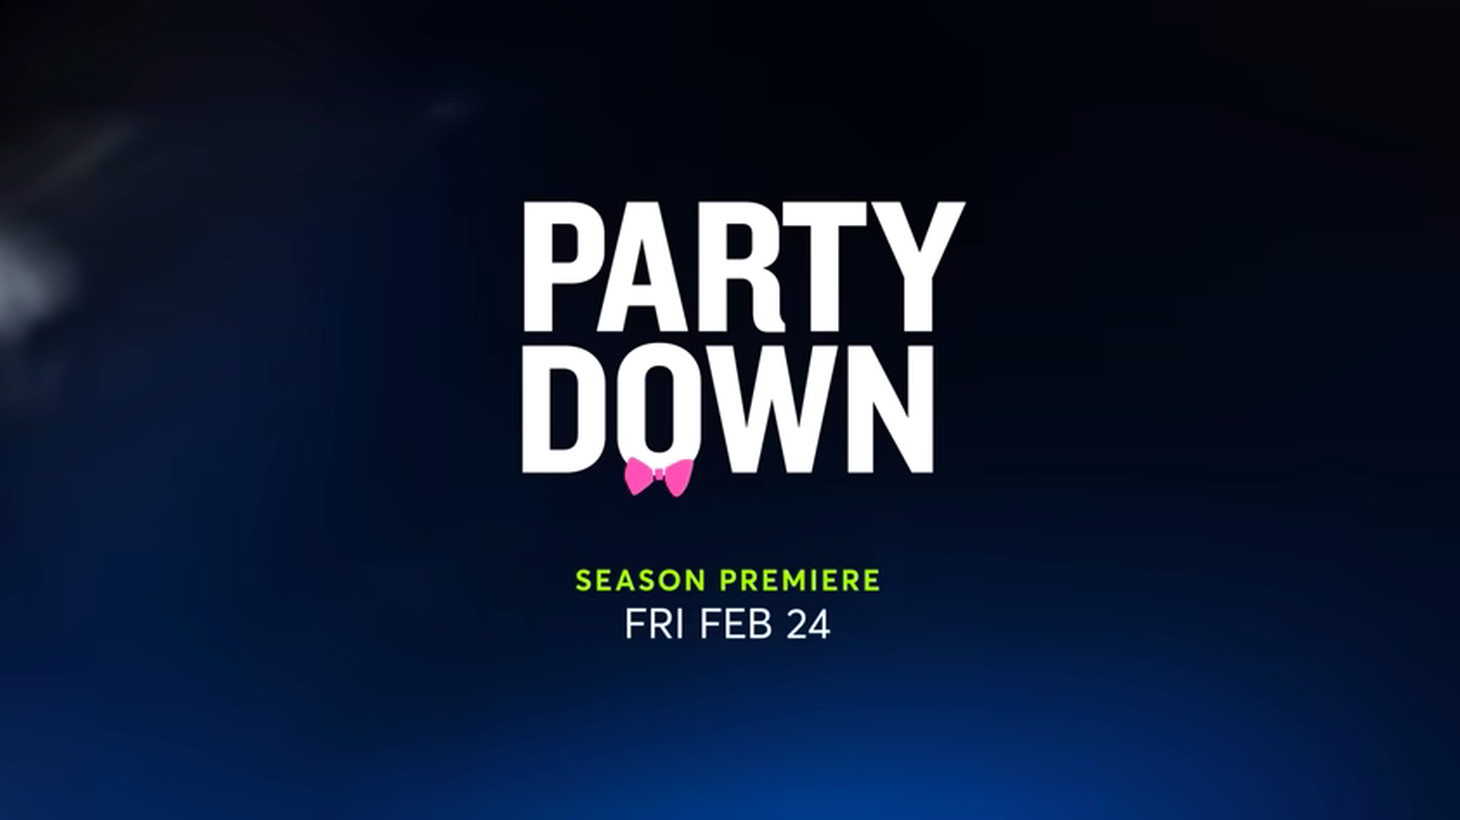 “They all want to be somewhere else. They all want to be doing other things and this is just a placeholder at best. And at worst, it's a constant reminder of the fact that they aren't where they want to be,” says “Party Down” showrunner John Enbom.